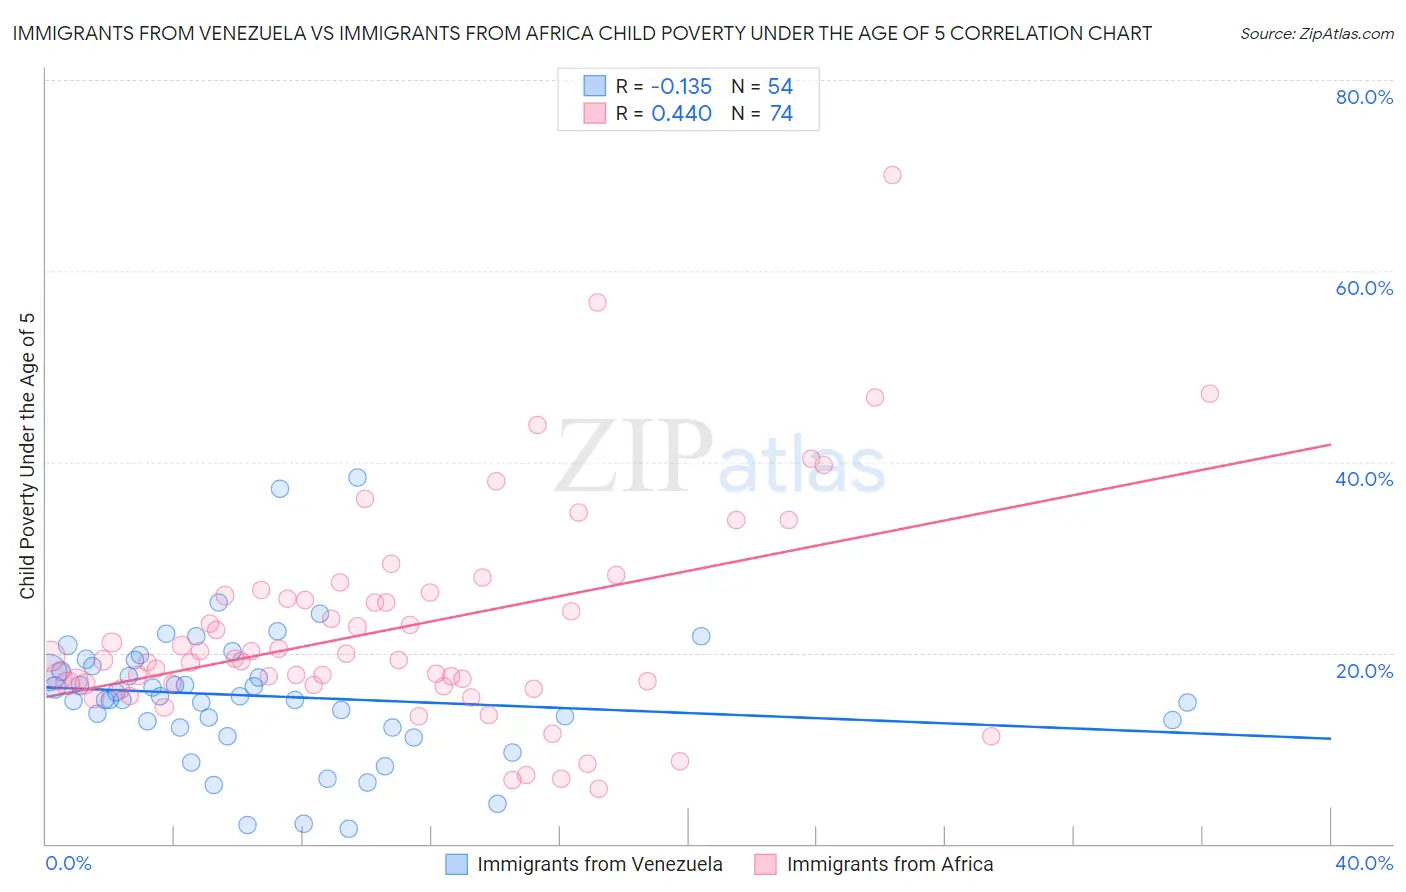 Immigrants from Venezuela vs Immigrants from Africa Child Poverty Under the Age of 5